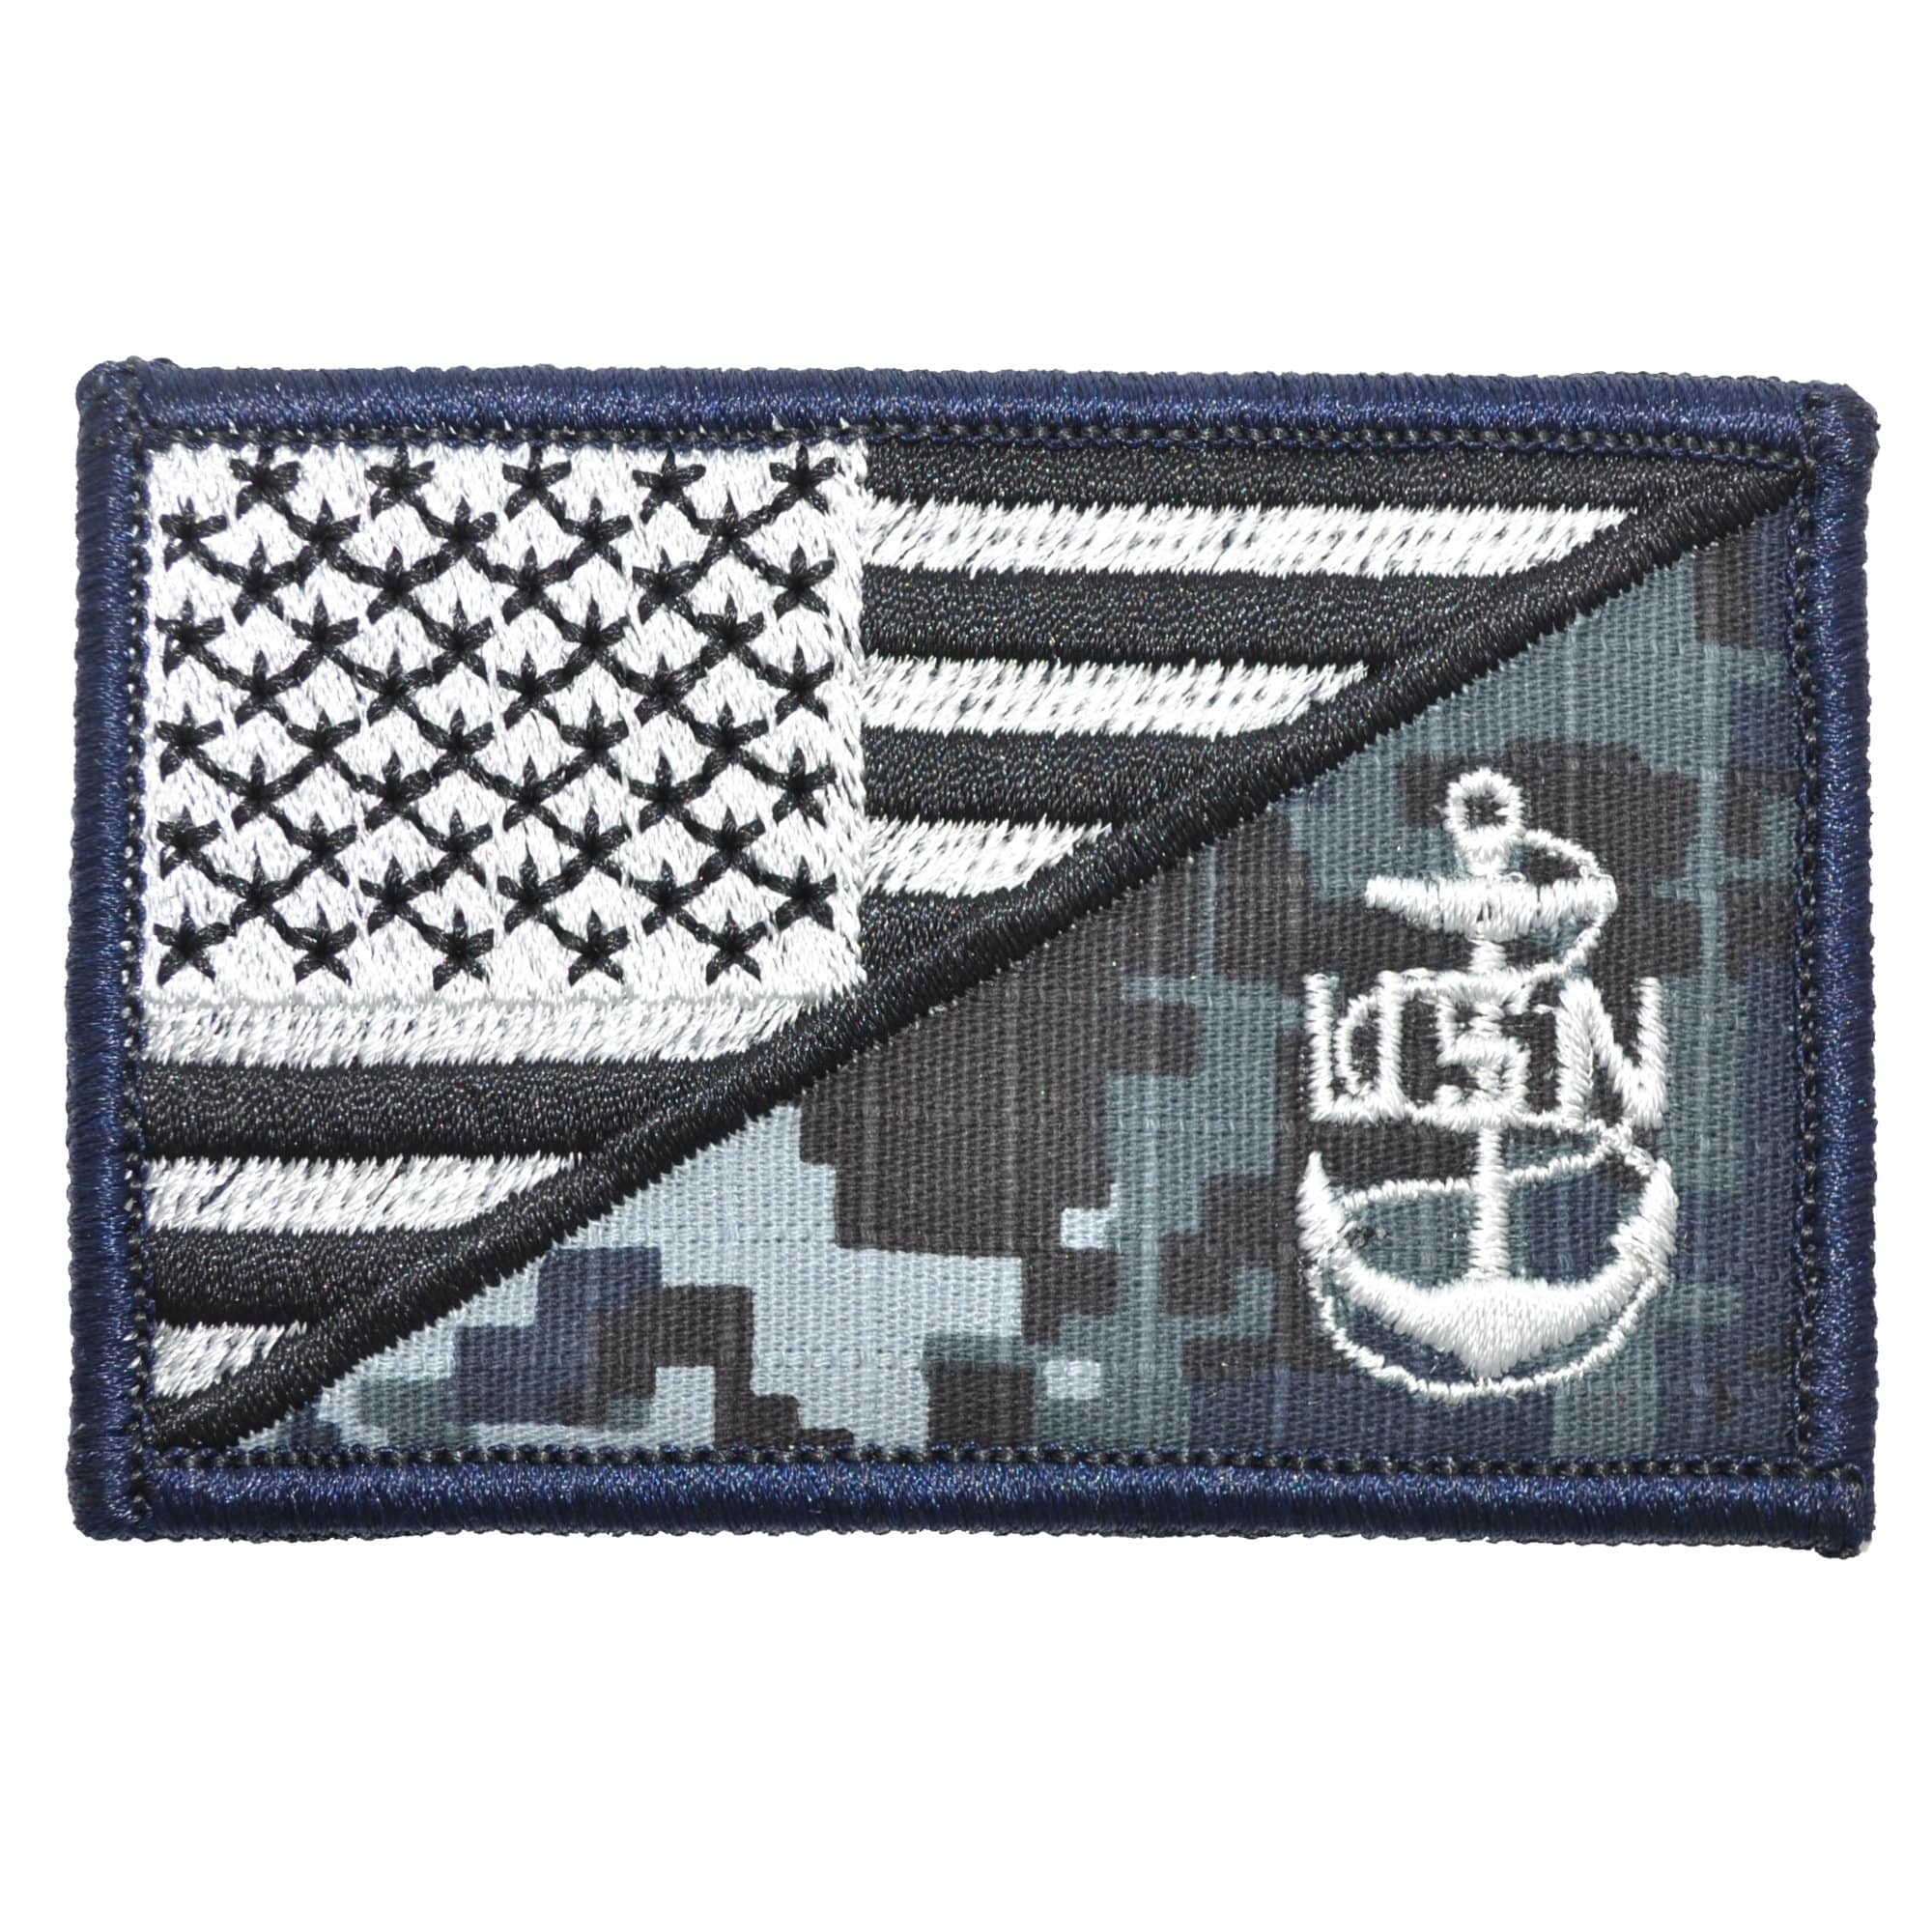 Tactical Gear Junkie Patches NWU Type I Navy Chief Petty Officer Anchor USA Flag - 2.25x3.5 Patch